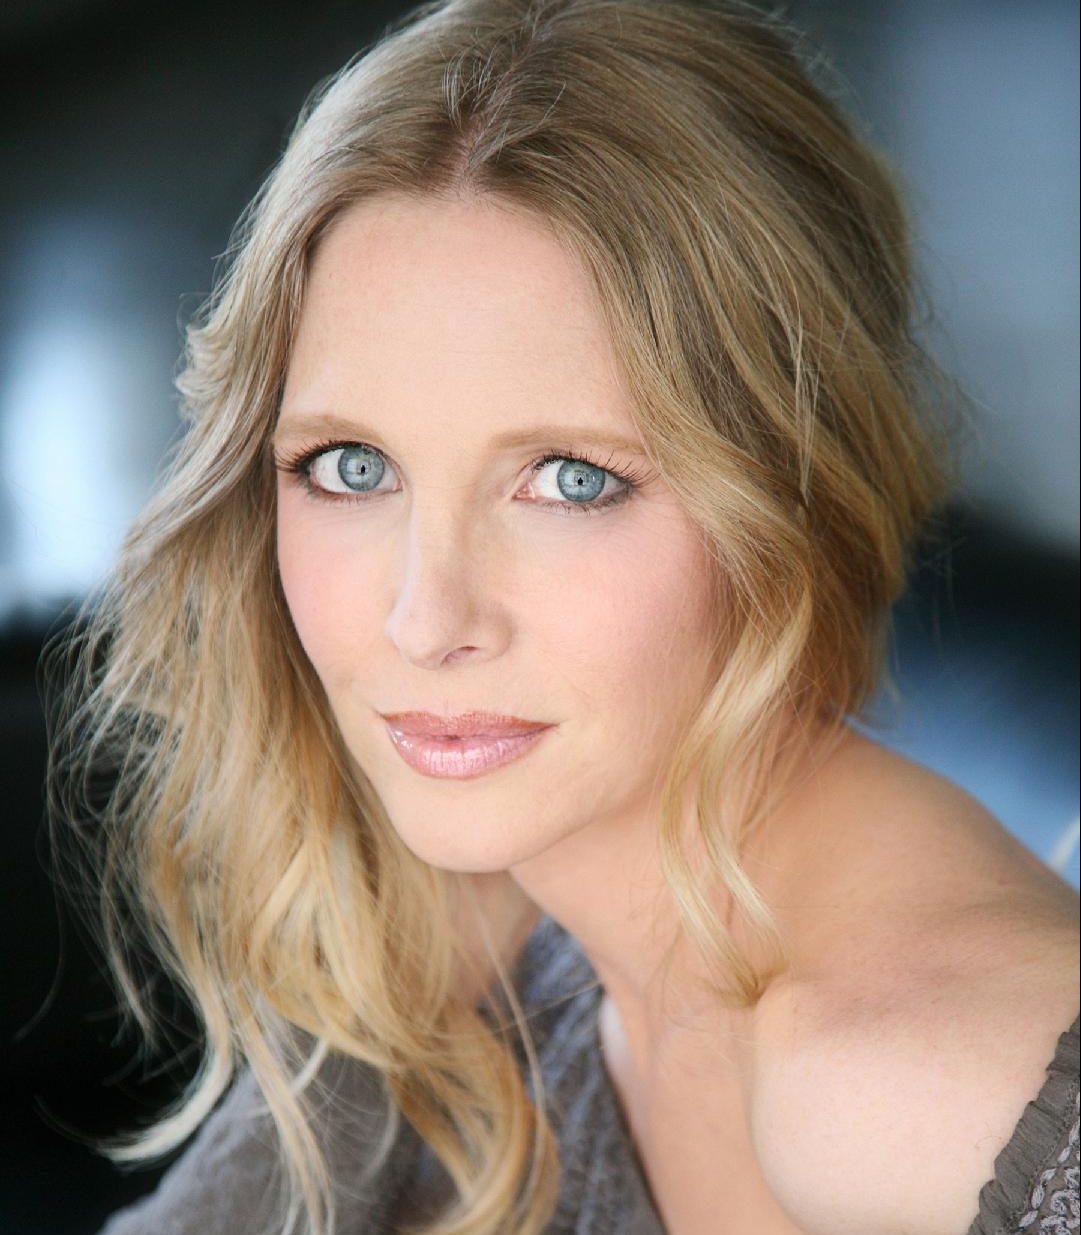 Y&R’s Lauralee Bell Set To Star in Two Lifetime Movies.